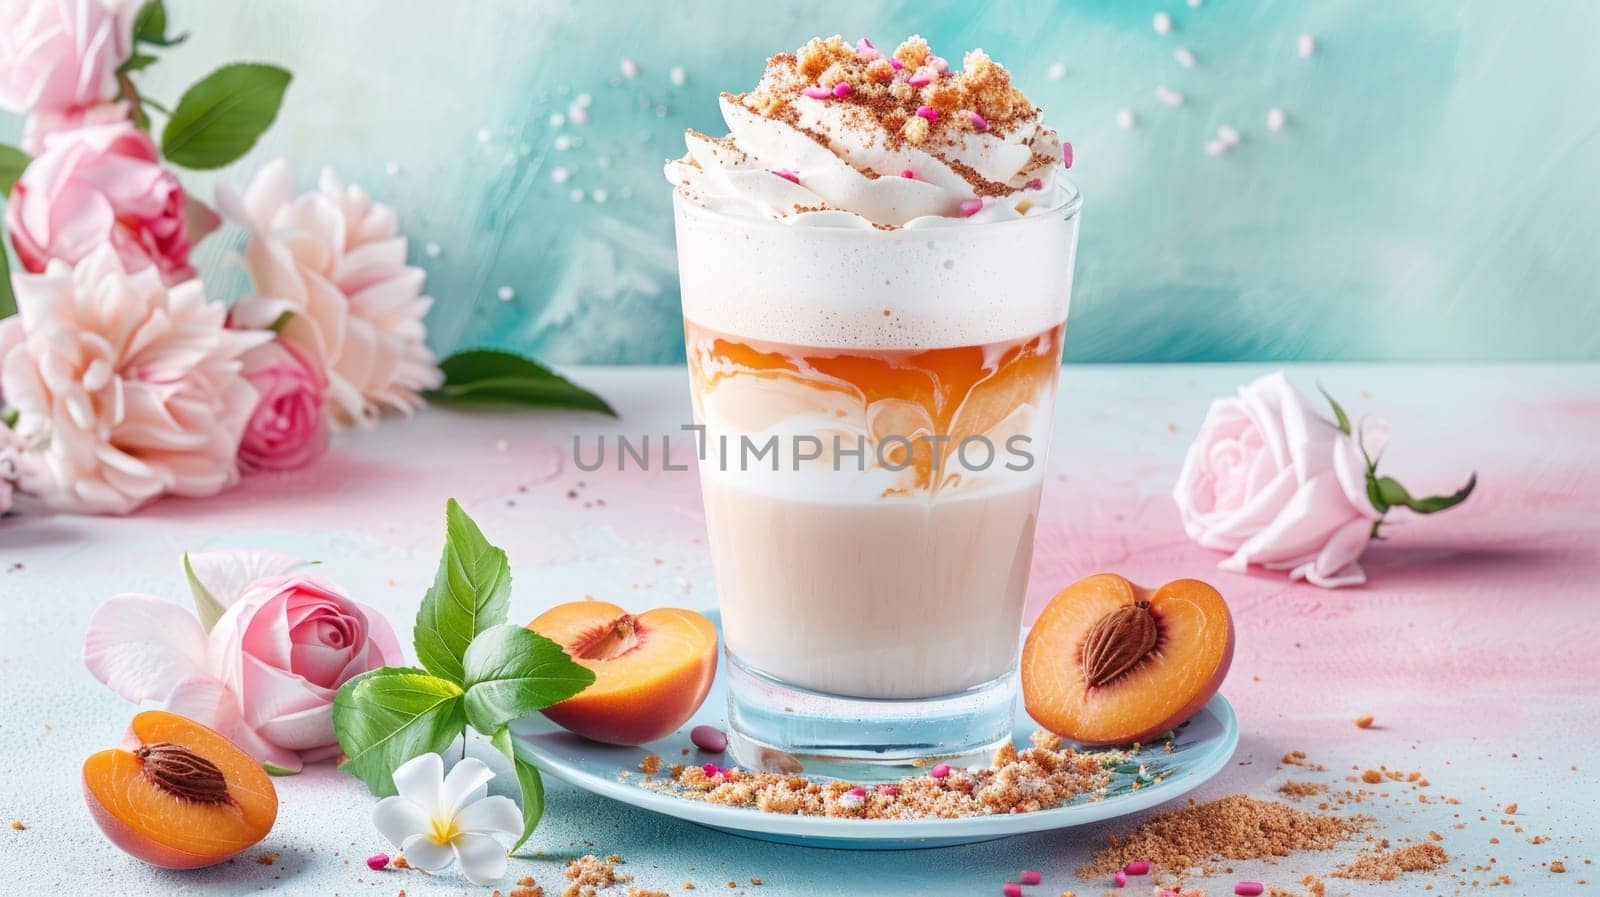 A glass of a drink with whipped cream and peach slices